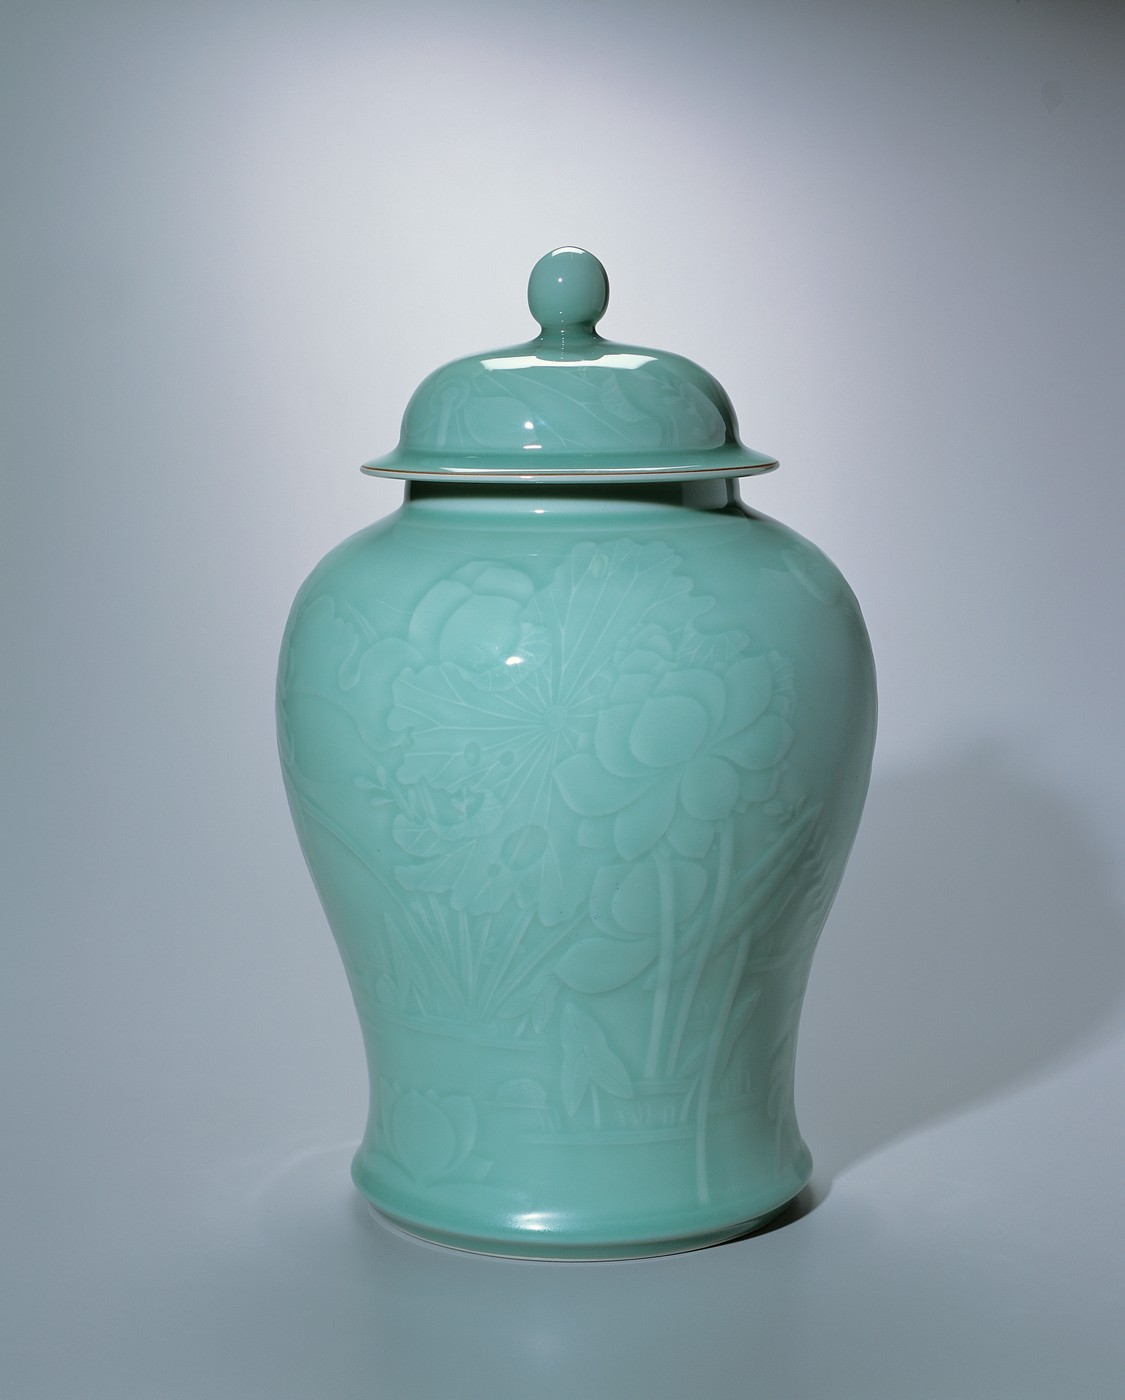 Temple Jar with Plum and Lotus Design